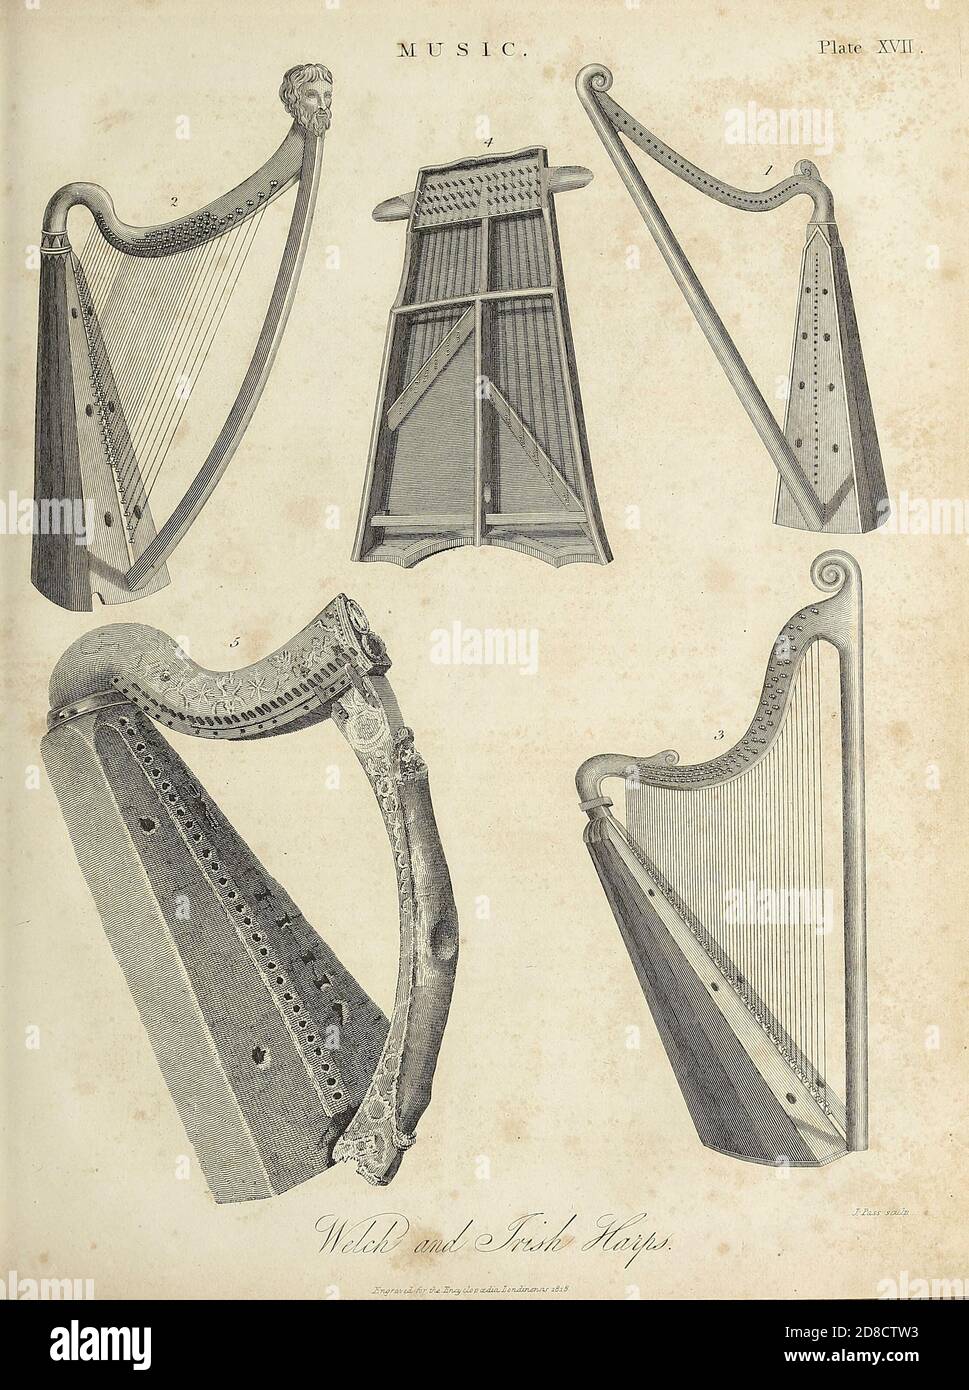 Welsh and Irish Harps Copperplate engraving From the Encyclopaedia Londinensis or, Universal dictionary of arts, sciences, and literature; Volume XVI;  Edited by Wilkes, John. Published in London in 1819 Stock Photo